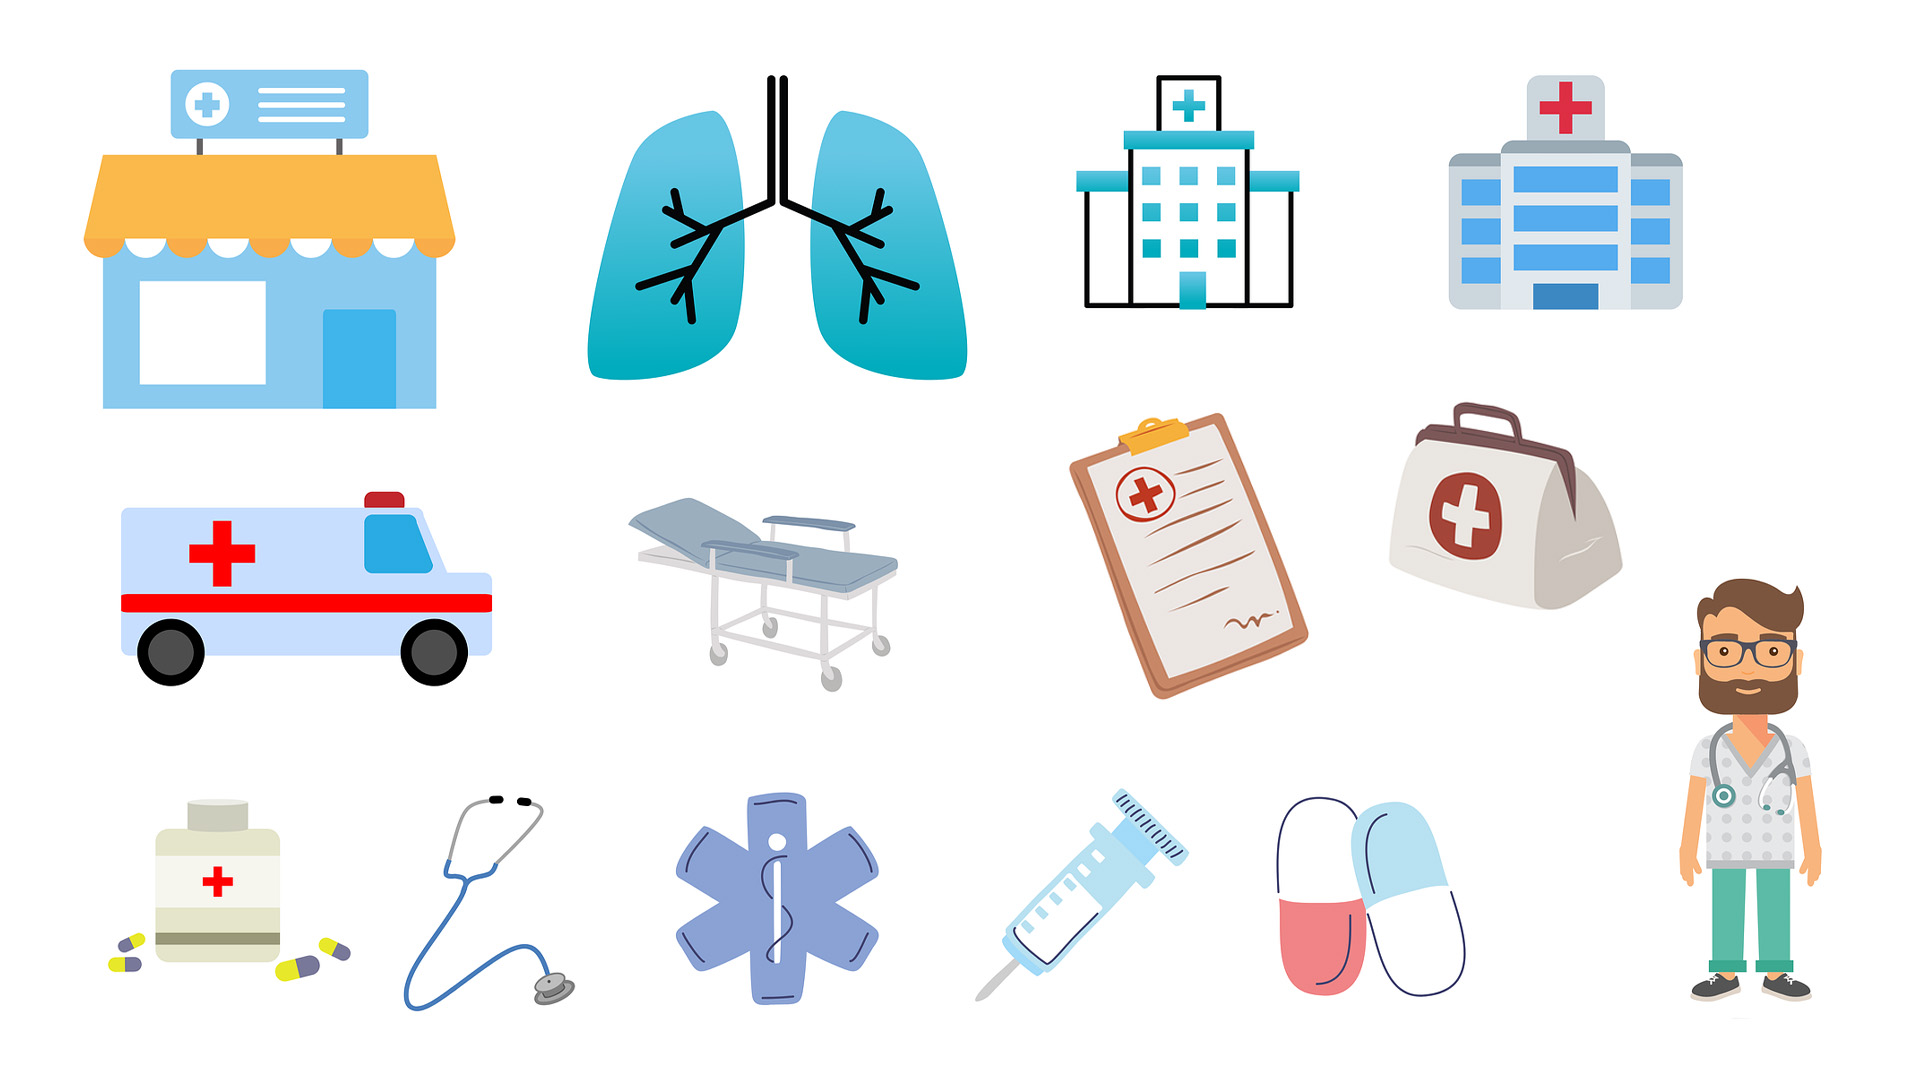 White background with different illustrated items that make up things associated with healthcare. Pharmacy, Lungs, Hospital, Ambulance, stretcher, clipboard, first aid bag, prescriptions, stethoscope, syringe, and a male nurse in scrubs.